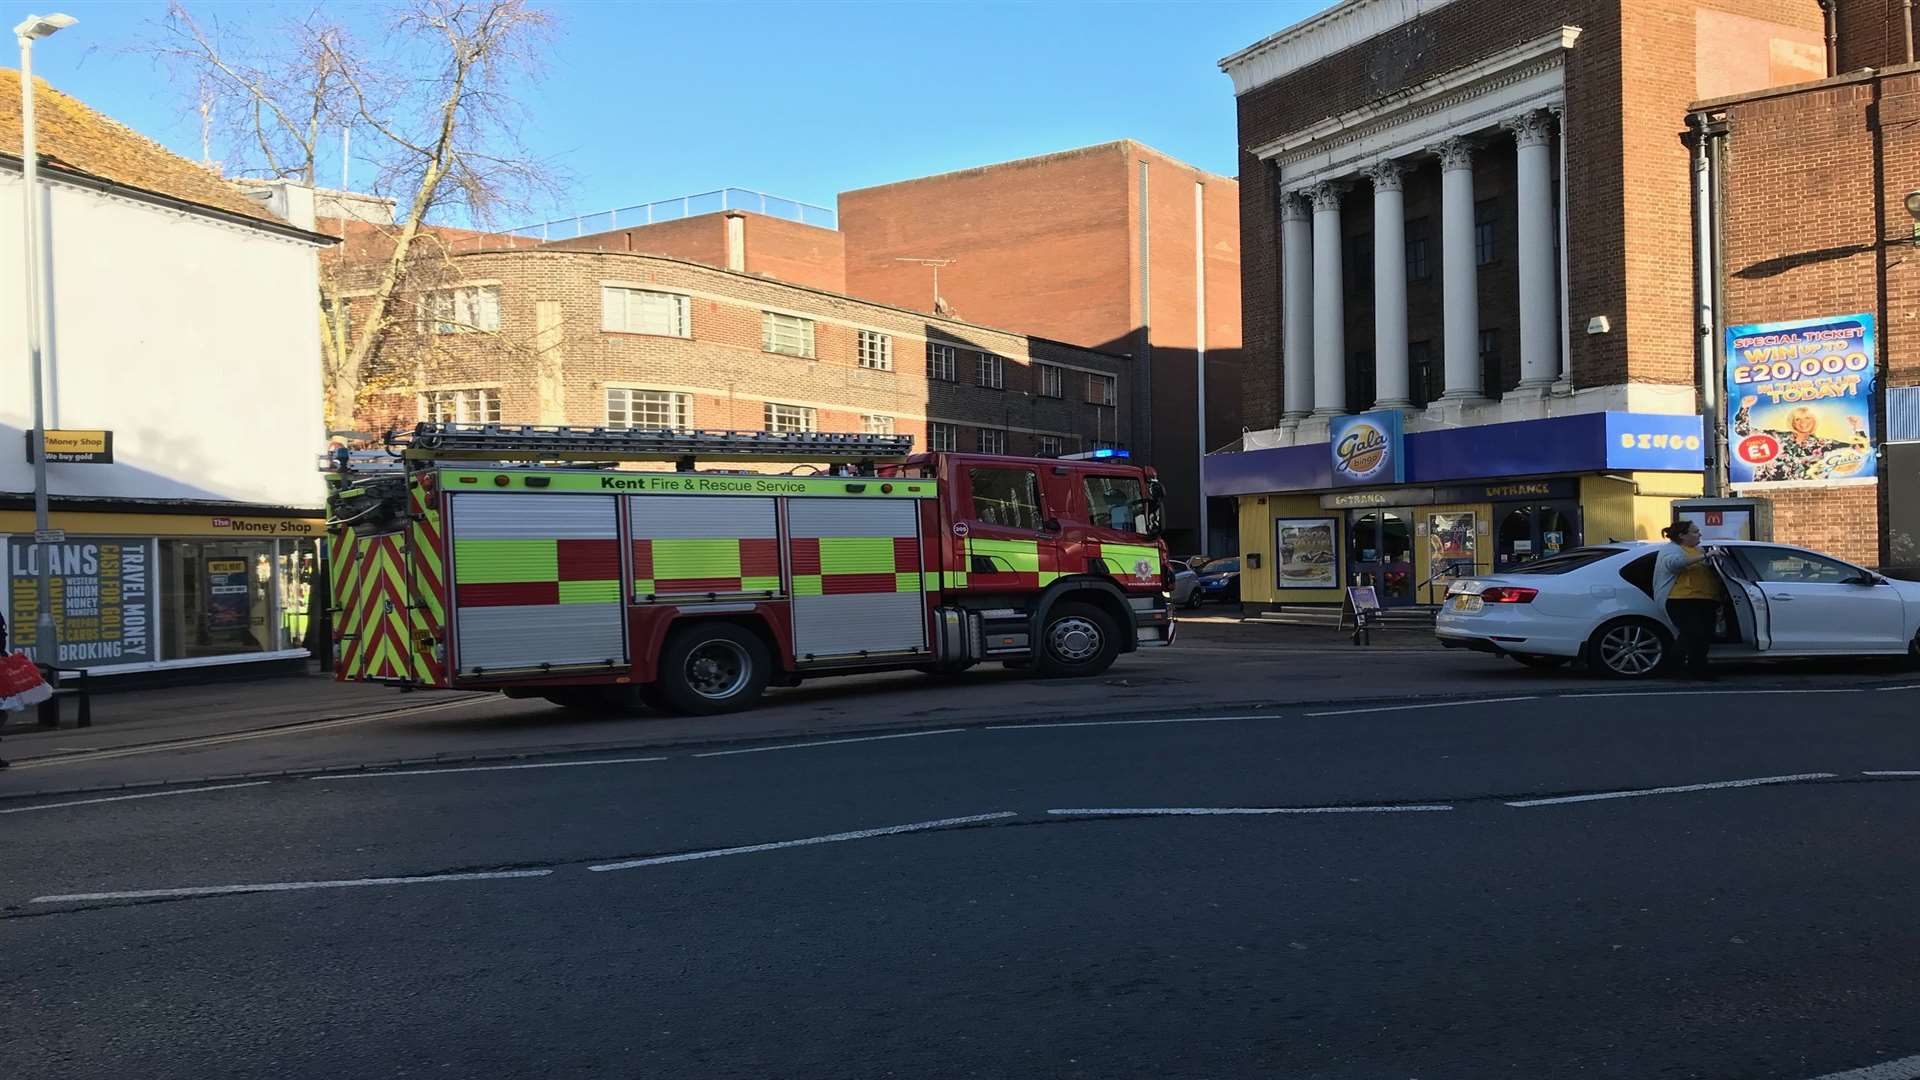 Fire engines were on Gabriels Hill and Lower Stone Street